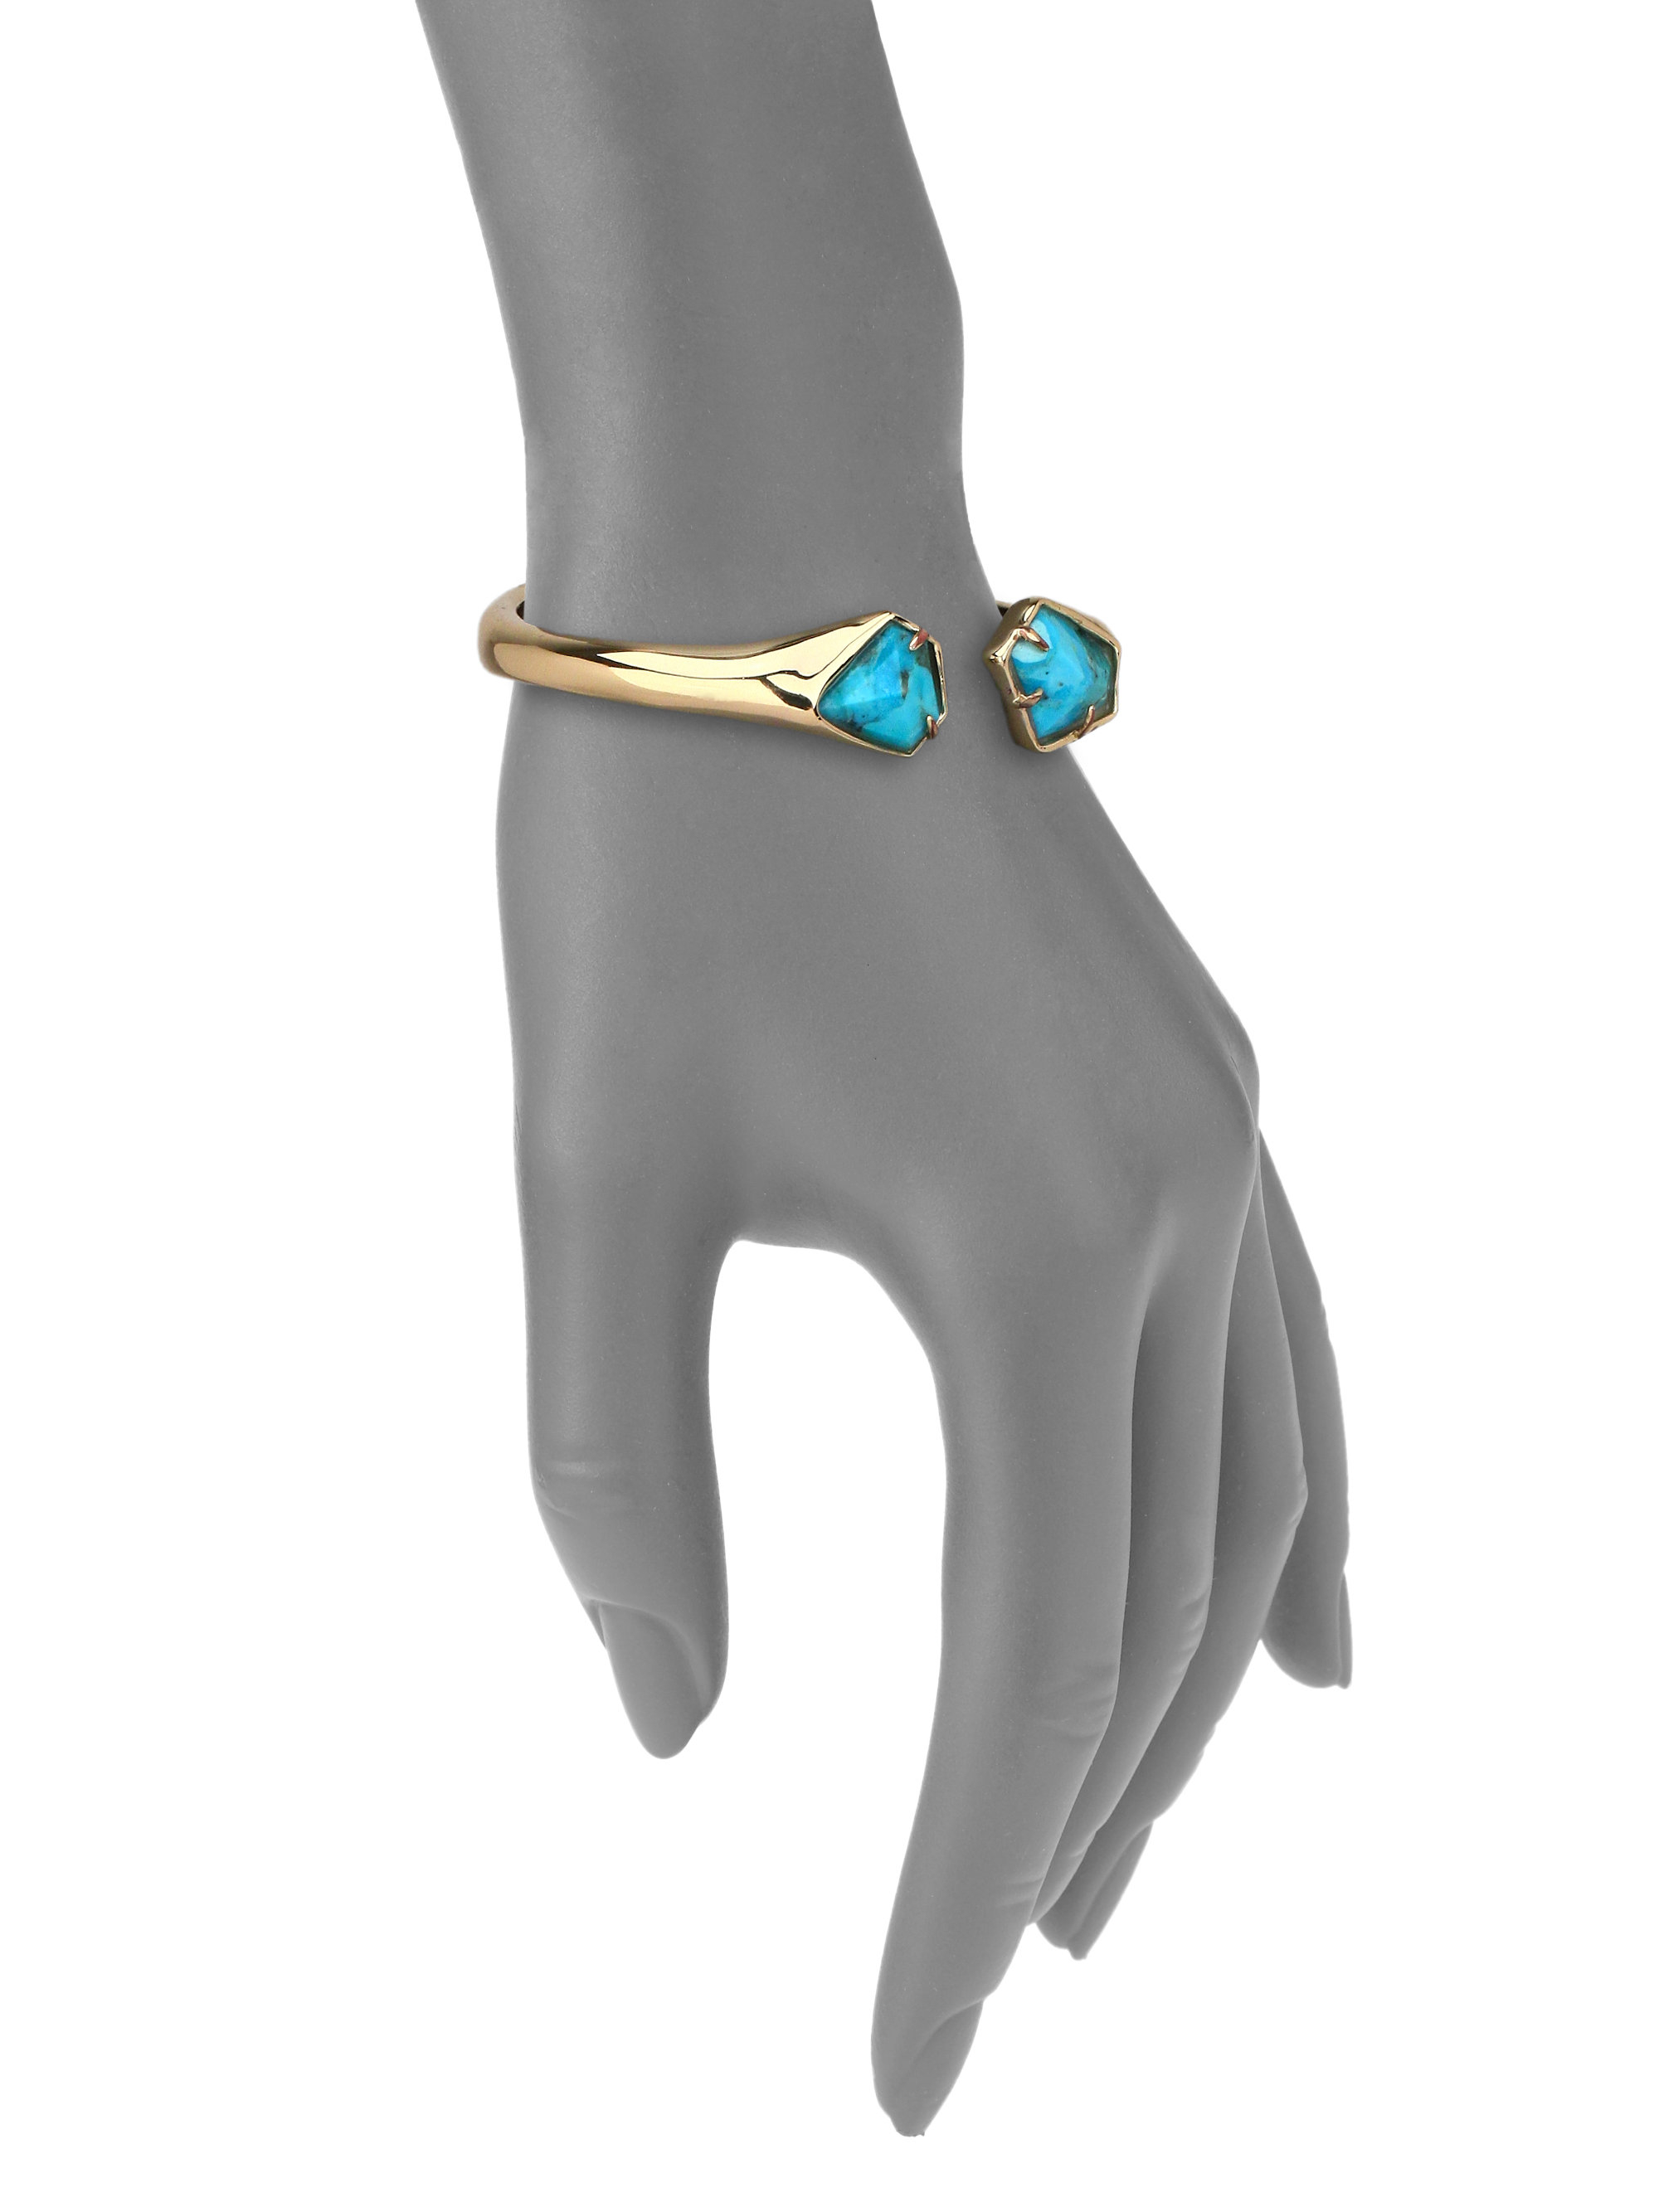 Womens Mens Jewellery Mens Bracelets Metallic Alexis Bittar Crystal And Turquoise Cuff Bracelet in Gold 